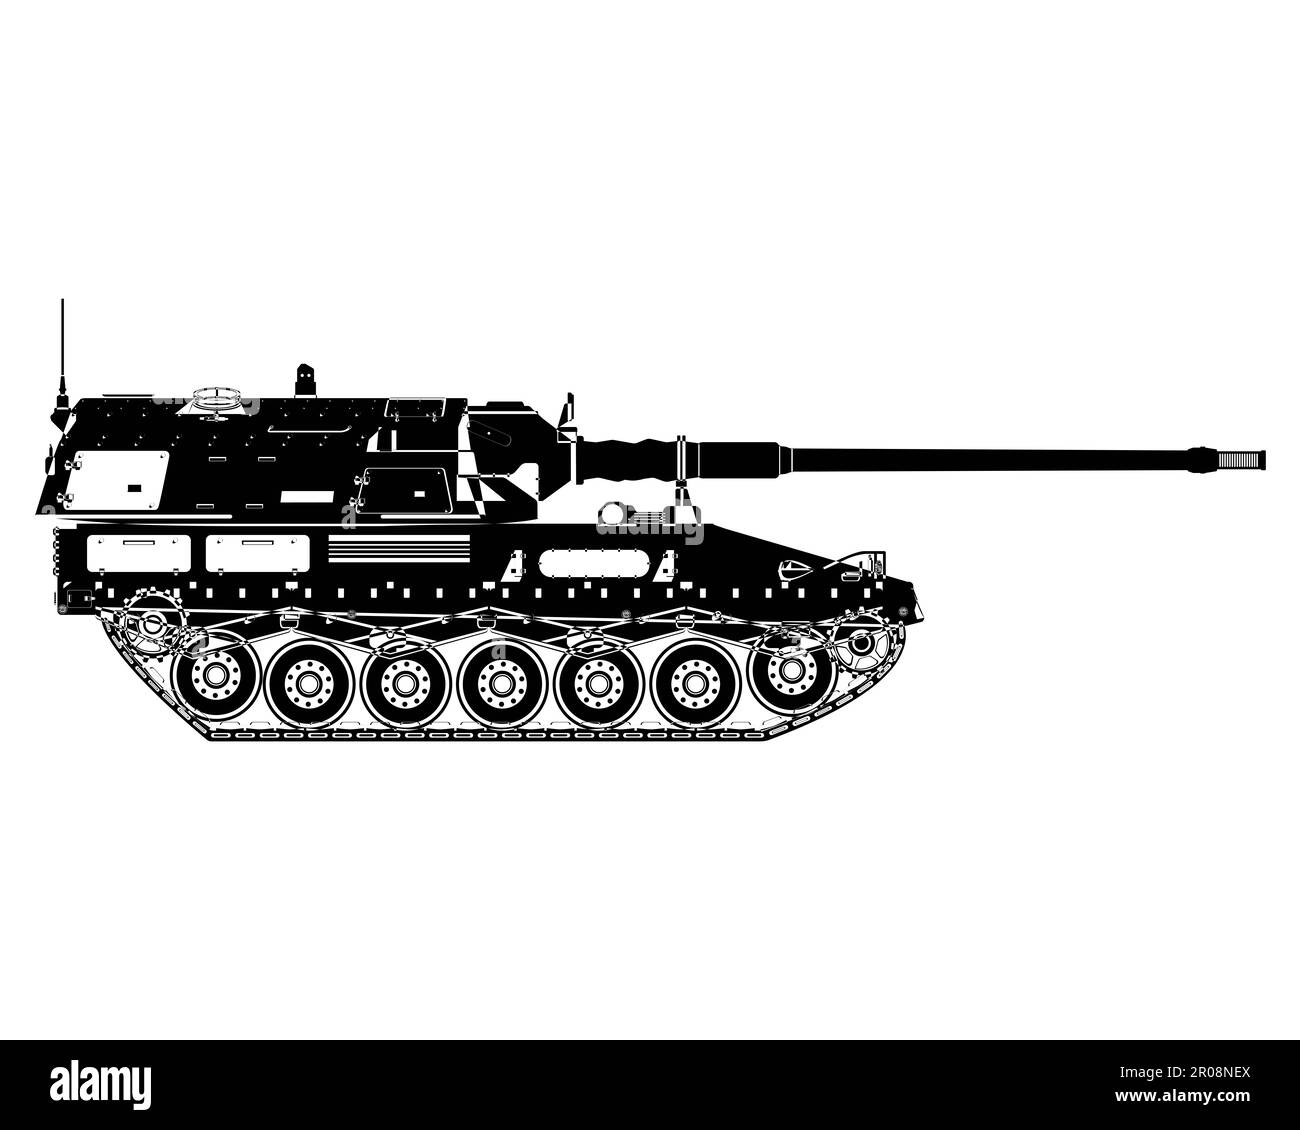 Self-propelled howitzer outline. German 155 mm Panzerhaubitze 2000. Military armored vehicle. Illustration isolated on white background. Stock Photo